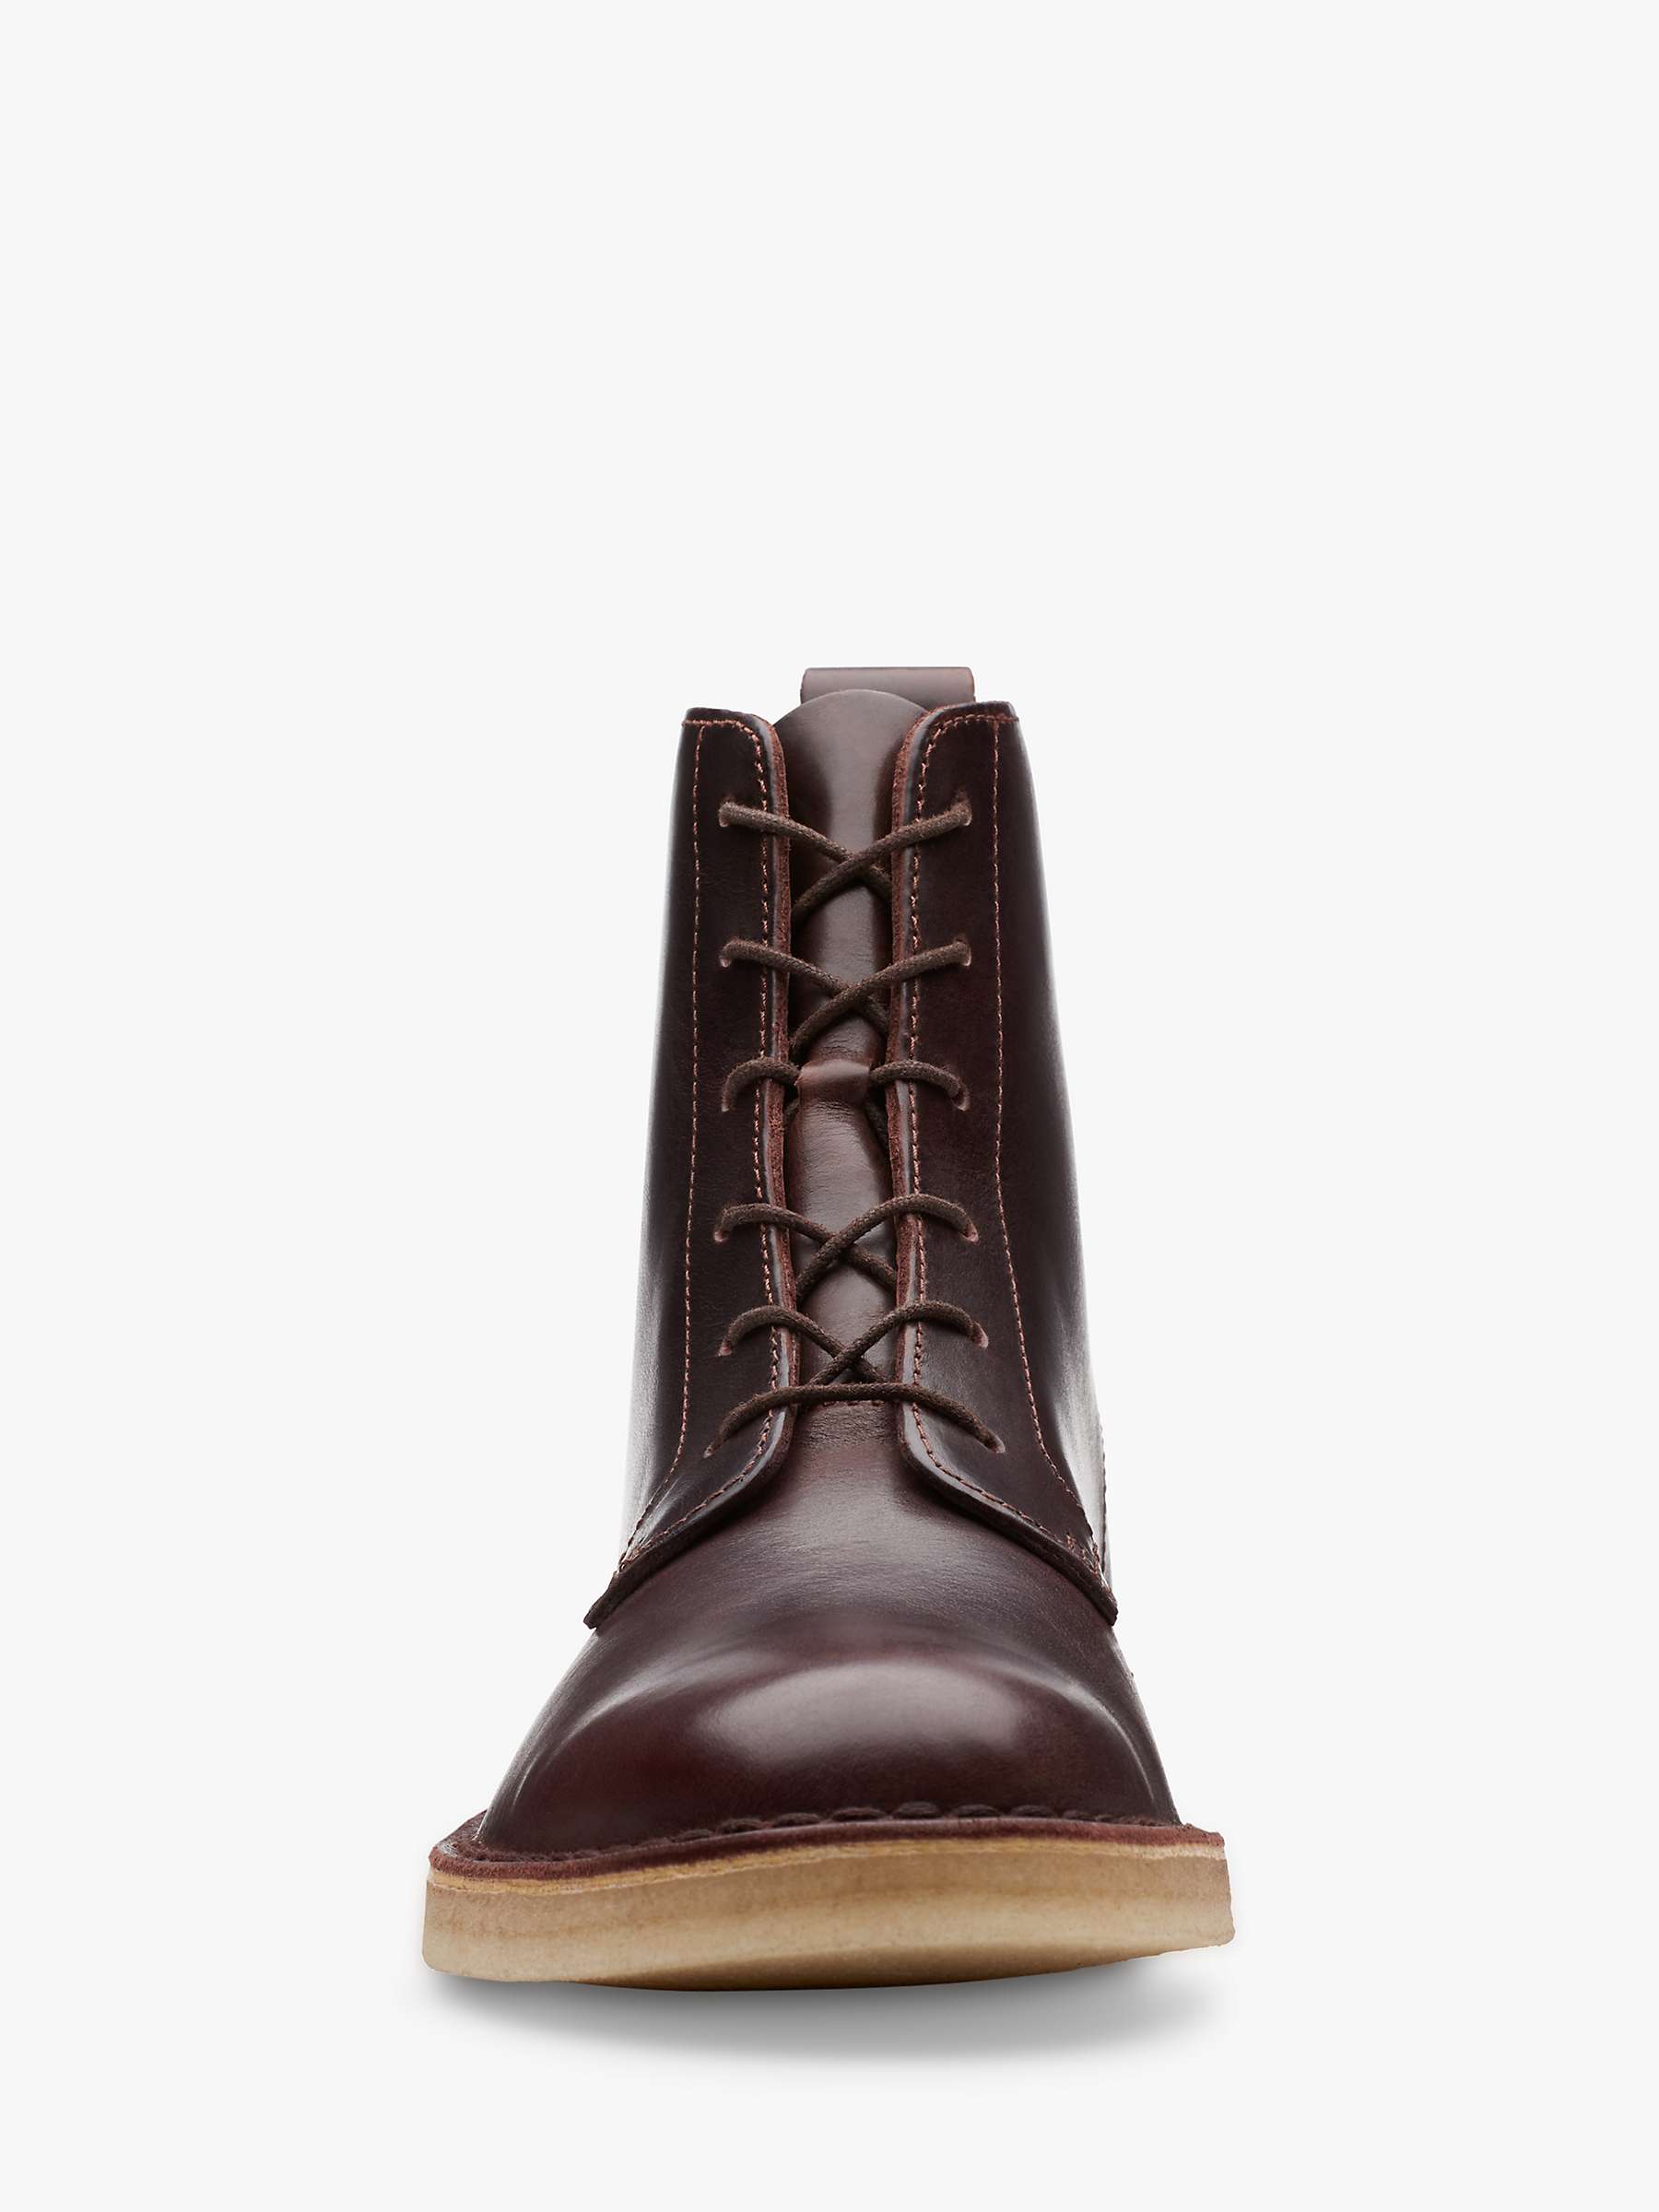 Discover Attach to Mockingbird Clarks Originals Desert Mali Leather Boots, Chestnut at John Lewis &  Partners